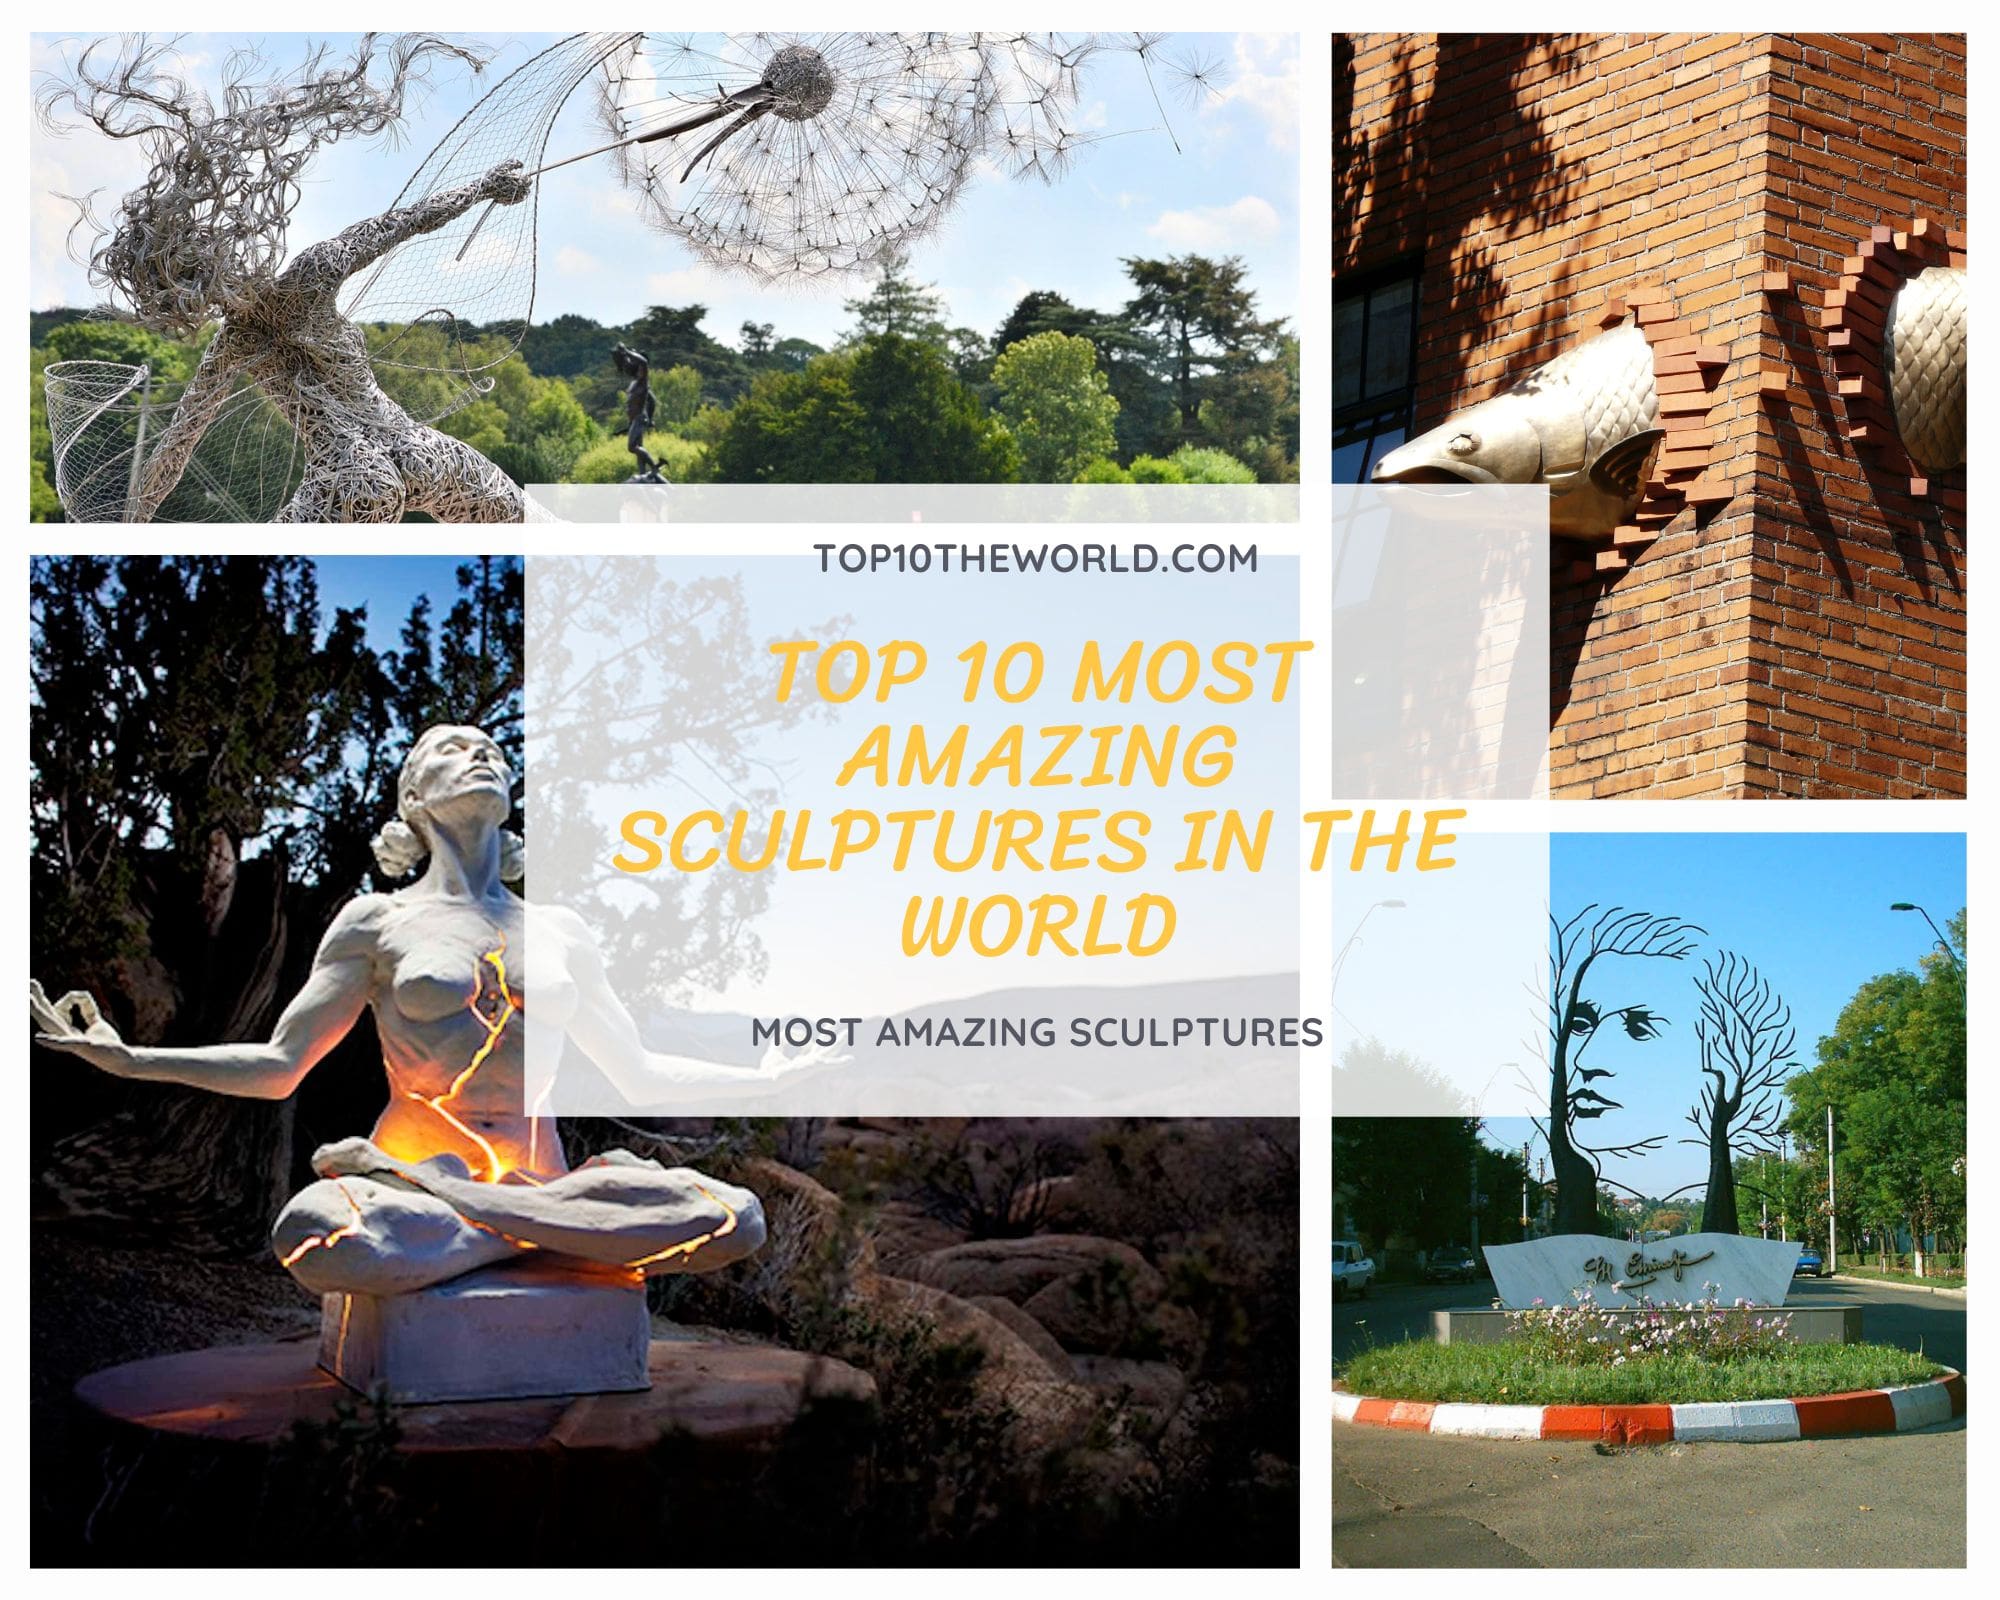 Top 10 Most Amazing Sculptures in the world